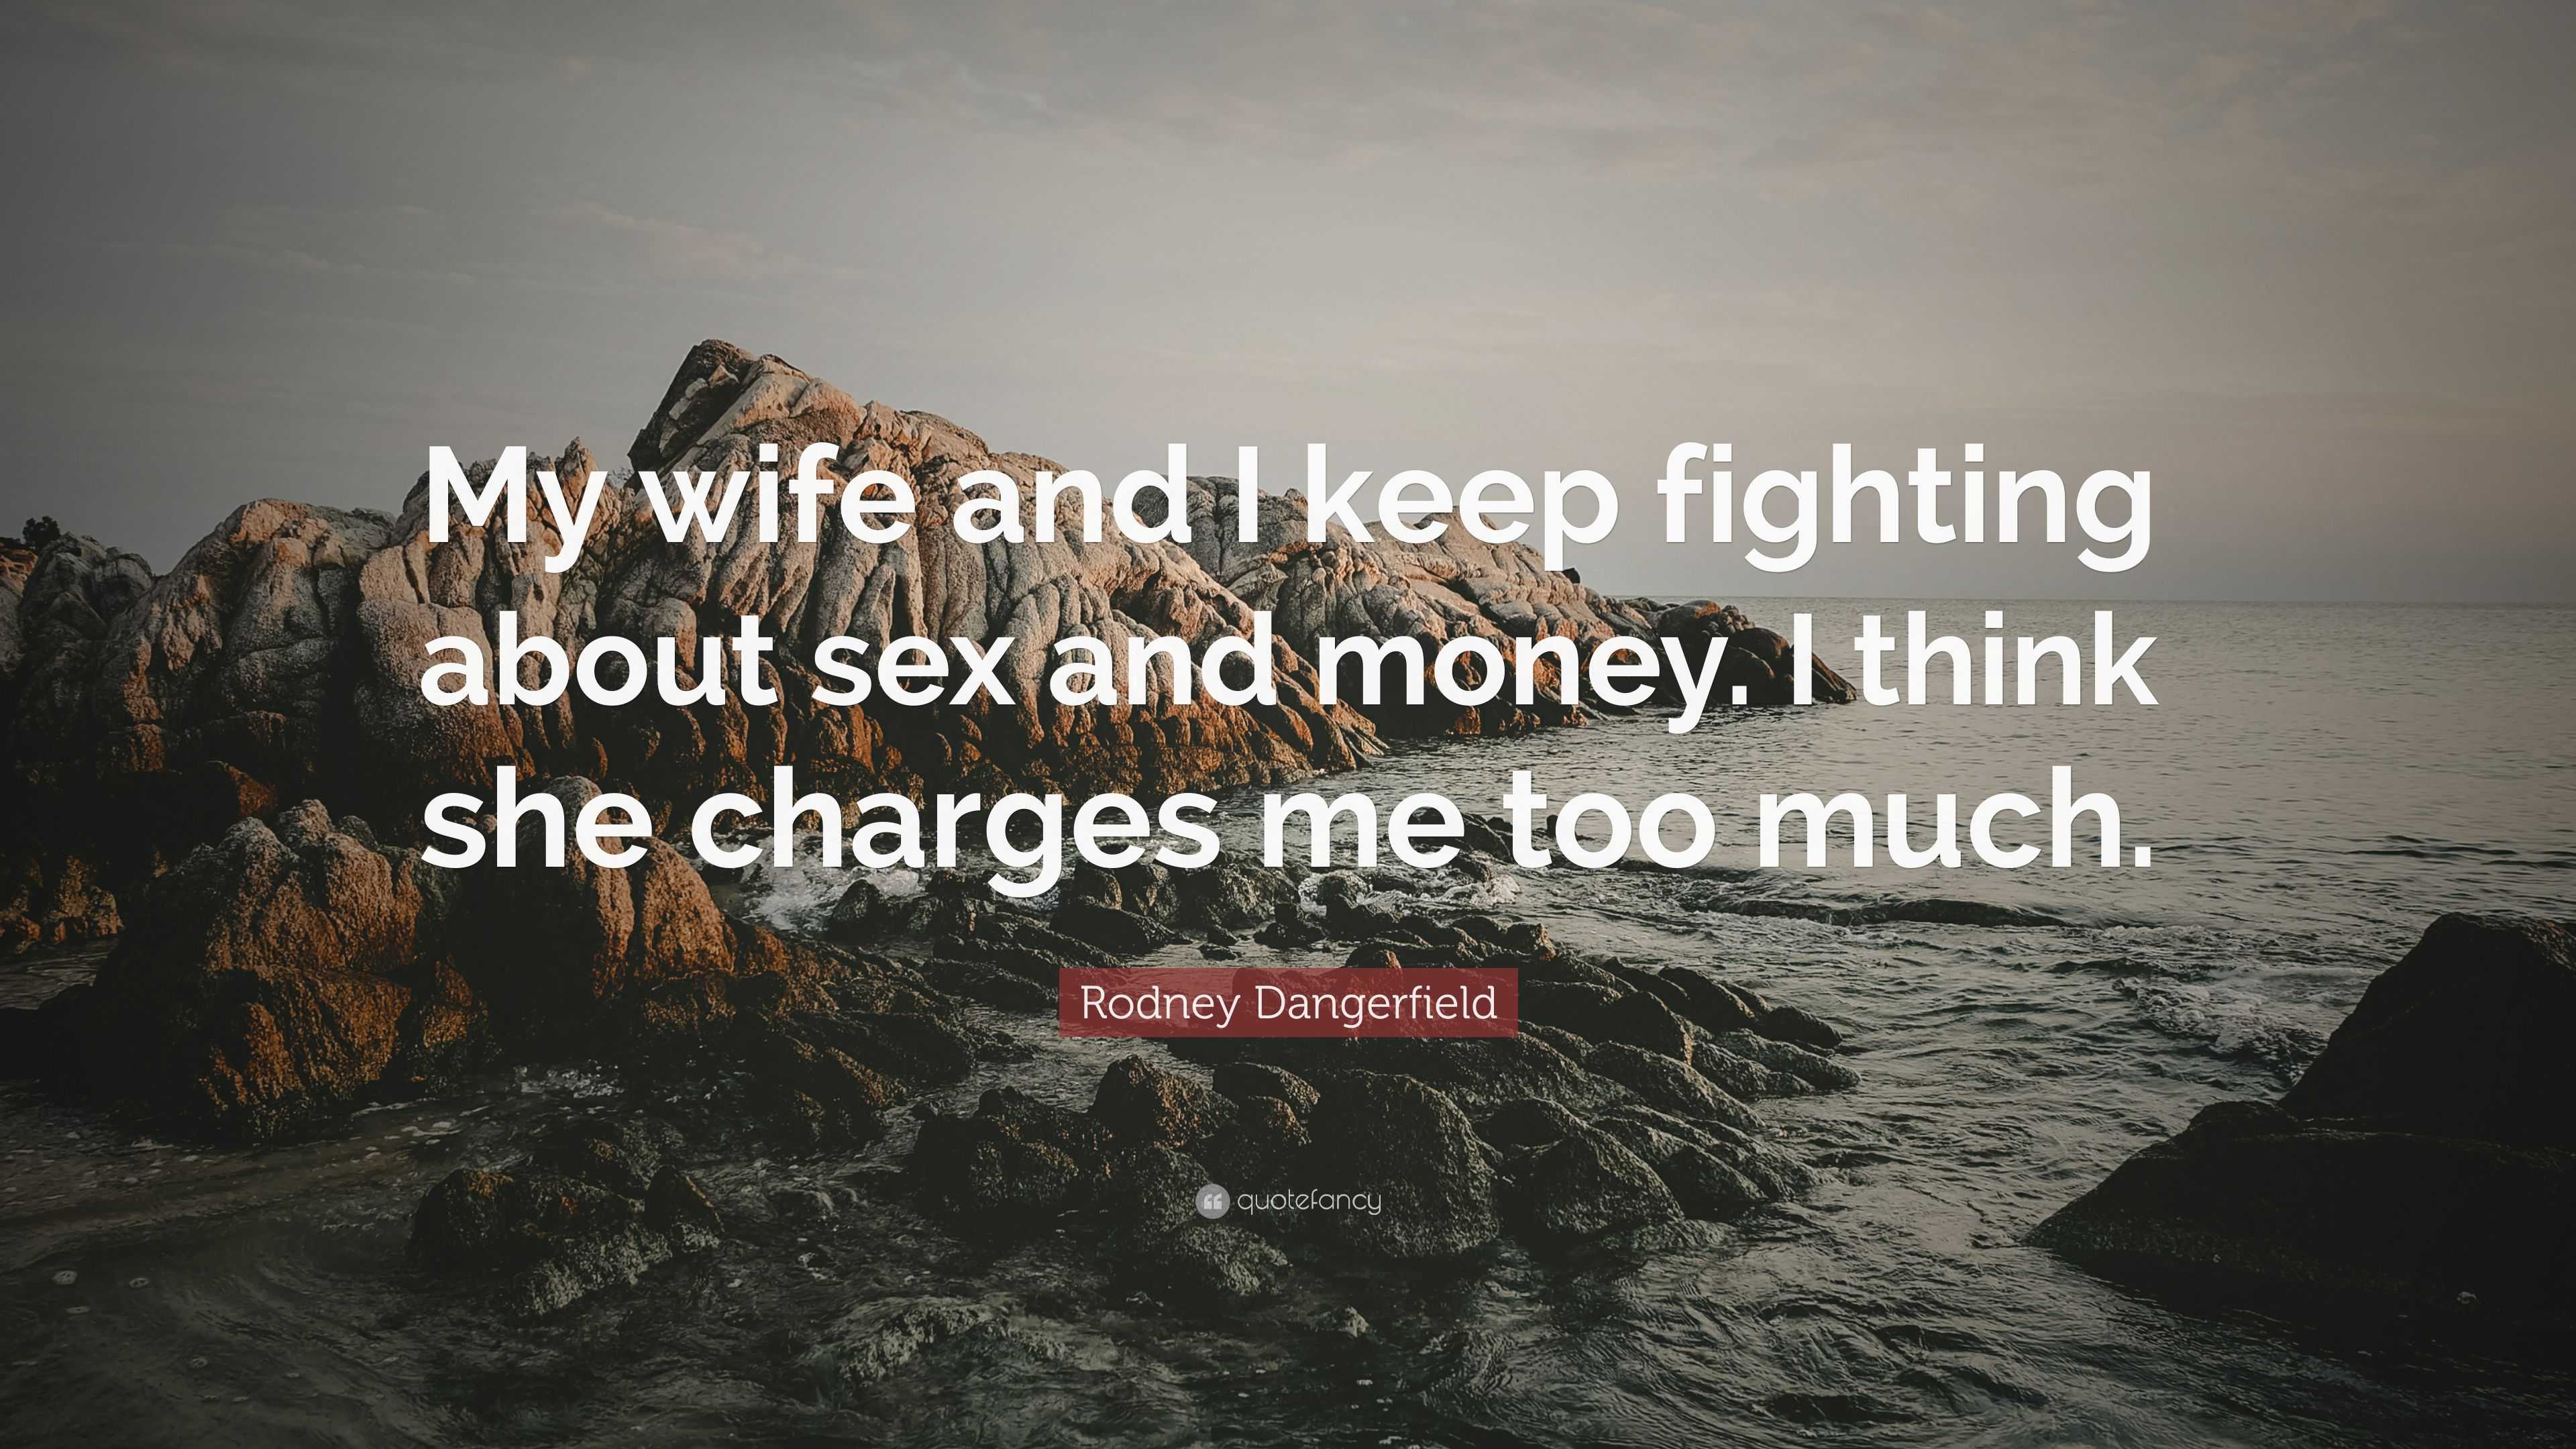 Rodney Dangerfield Quote “My wife and I keep fighting about sex and money image photo